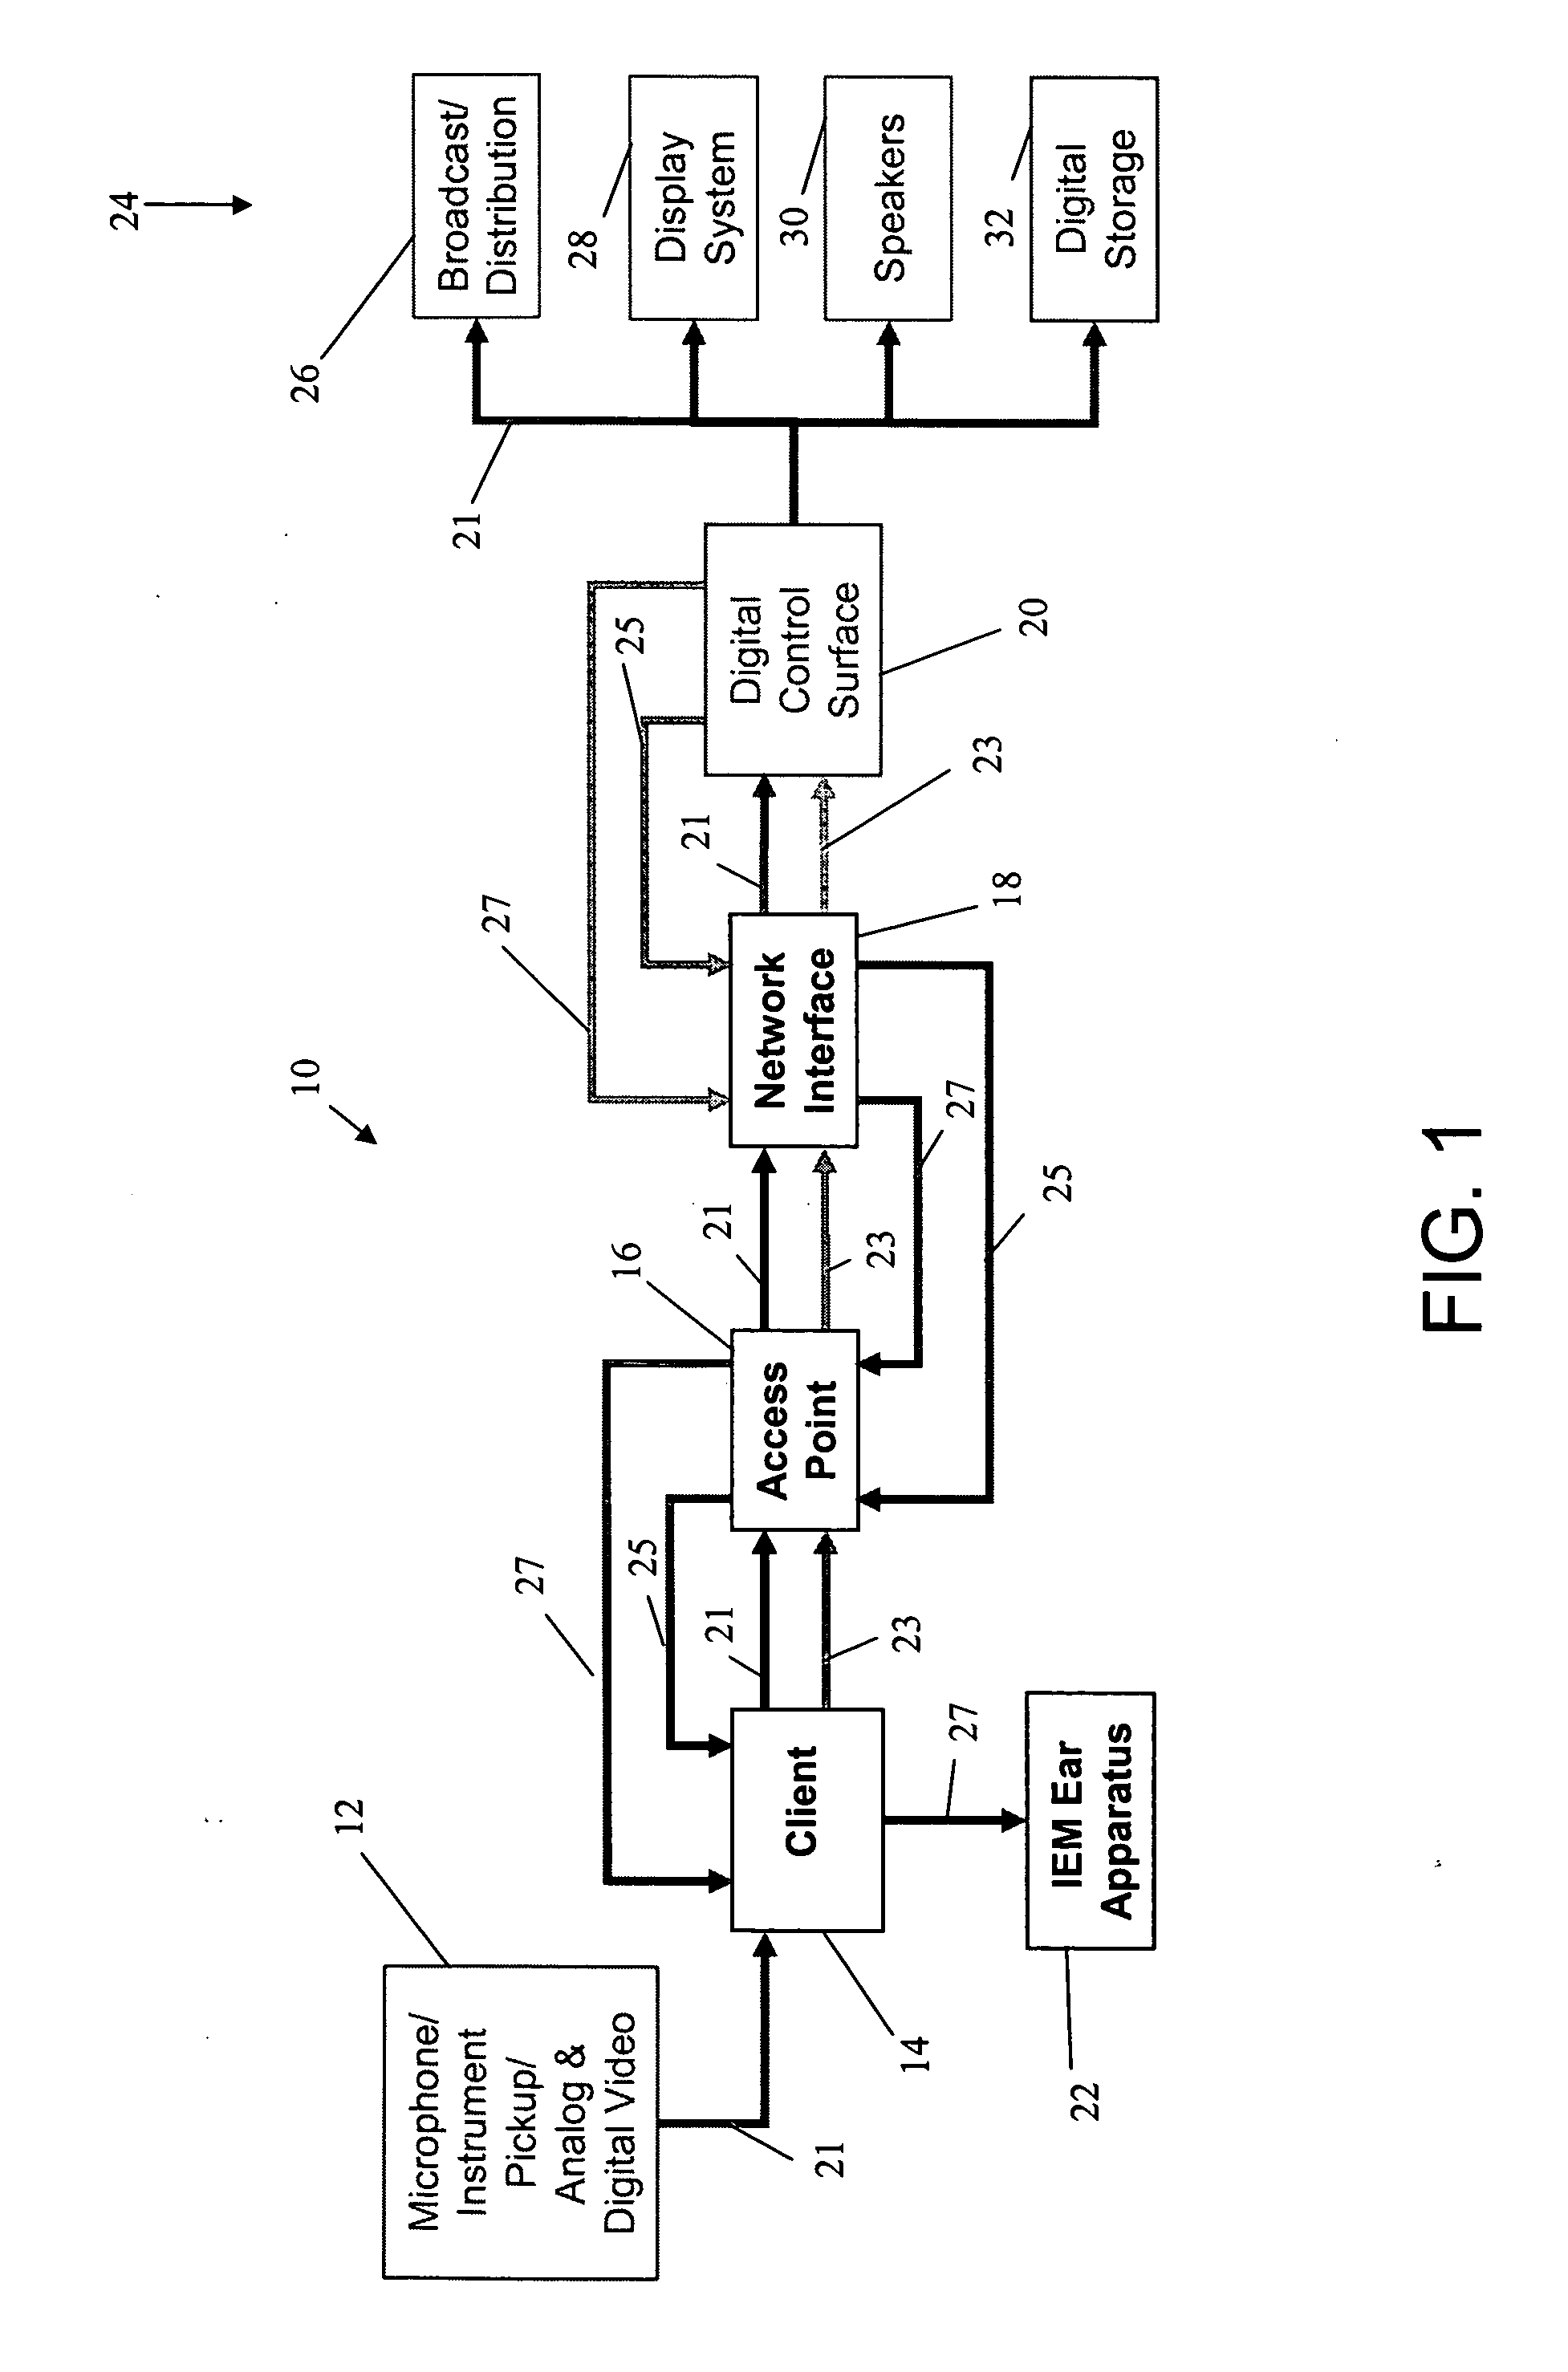 Combined multi-media and in ear monitoring system and method of remote monitoring and control thereof